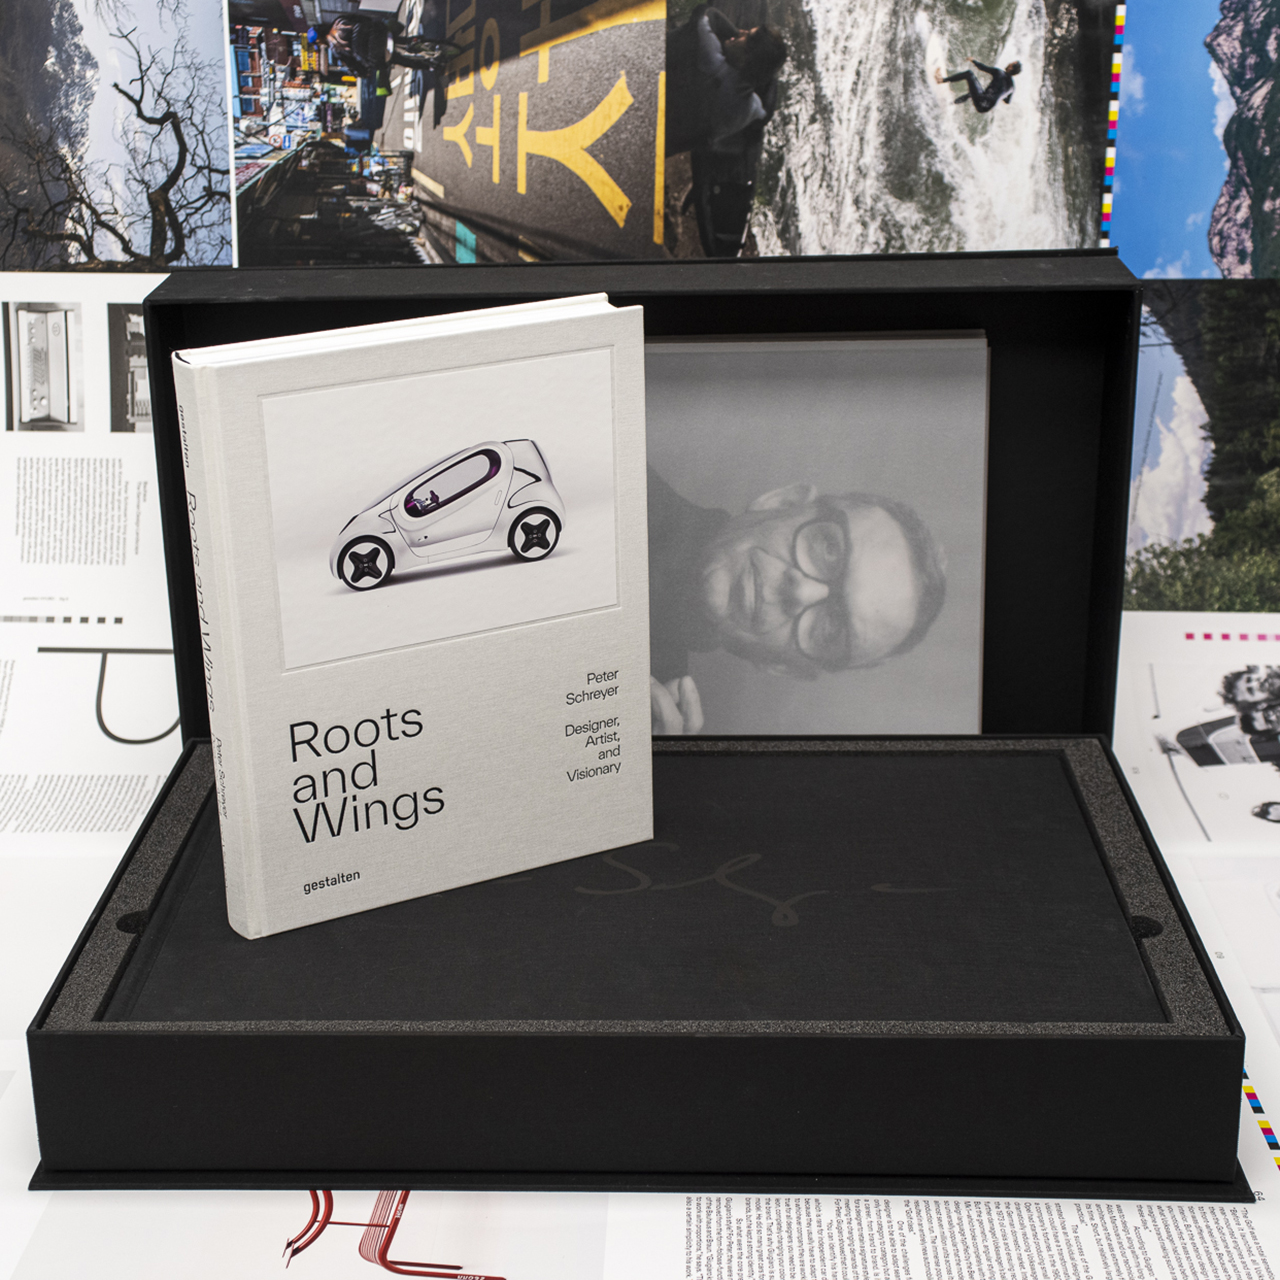 Roots and Wings - Peter Schreyer: Designer, Artist, and Visionary